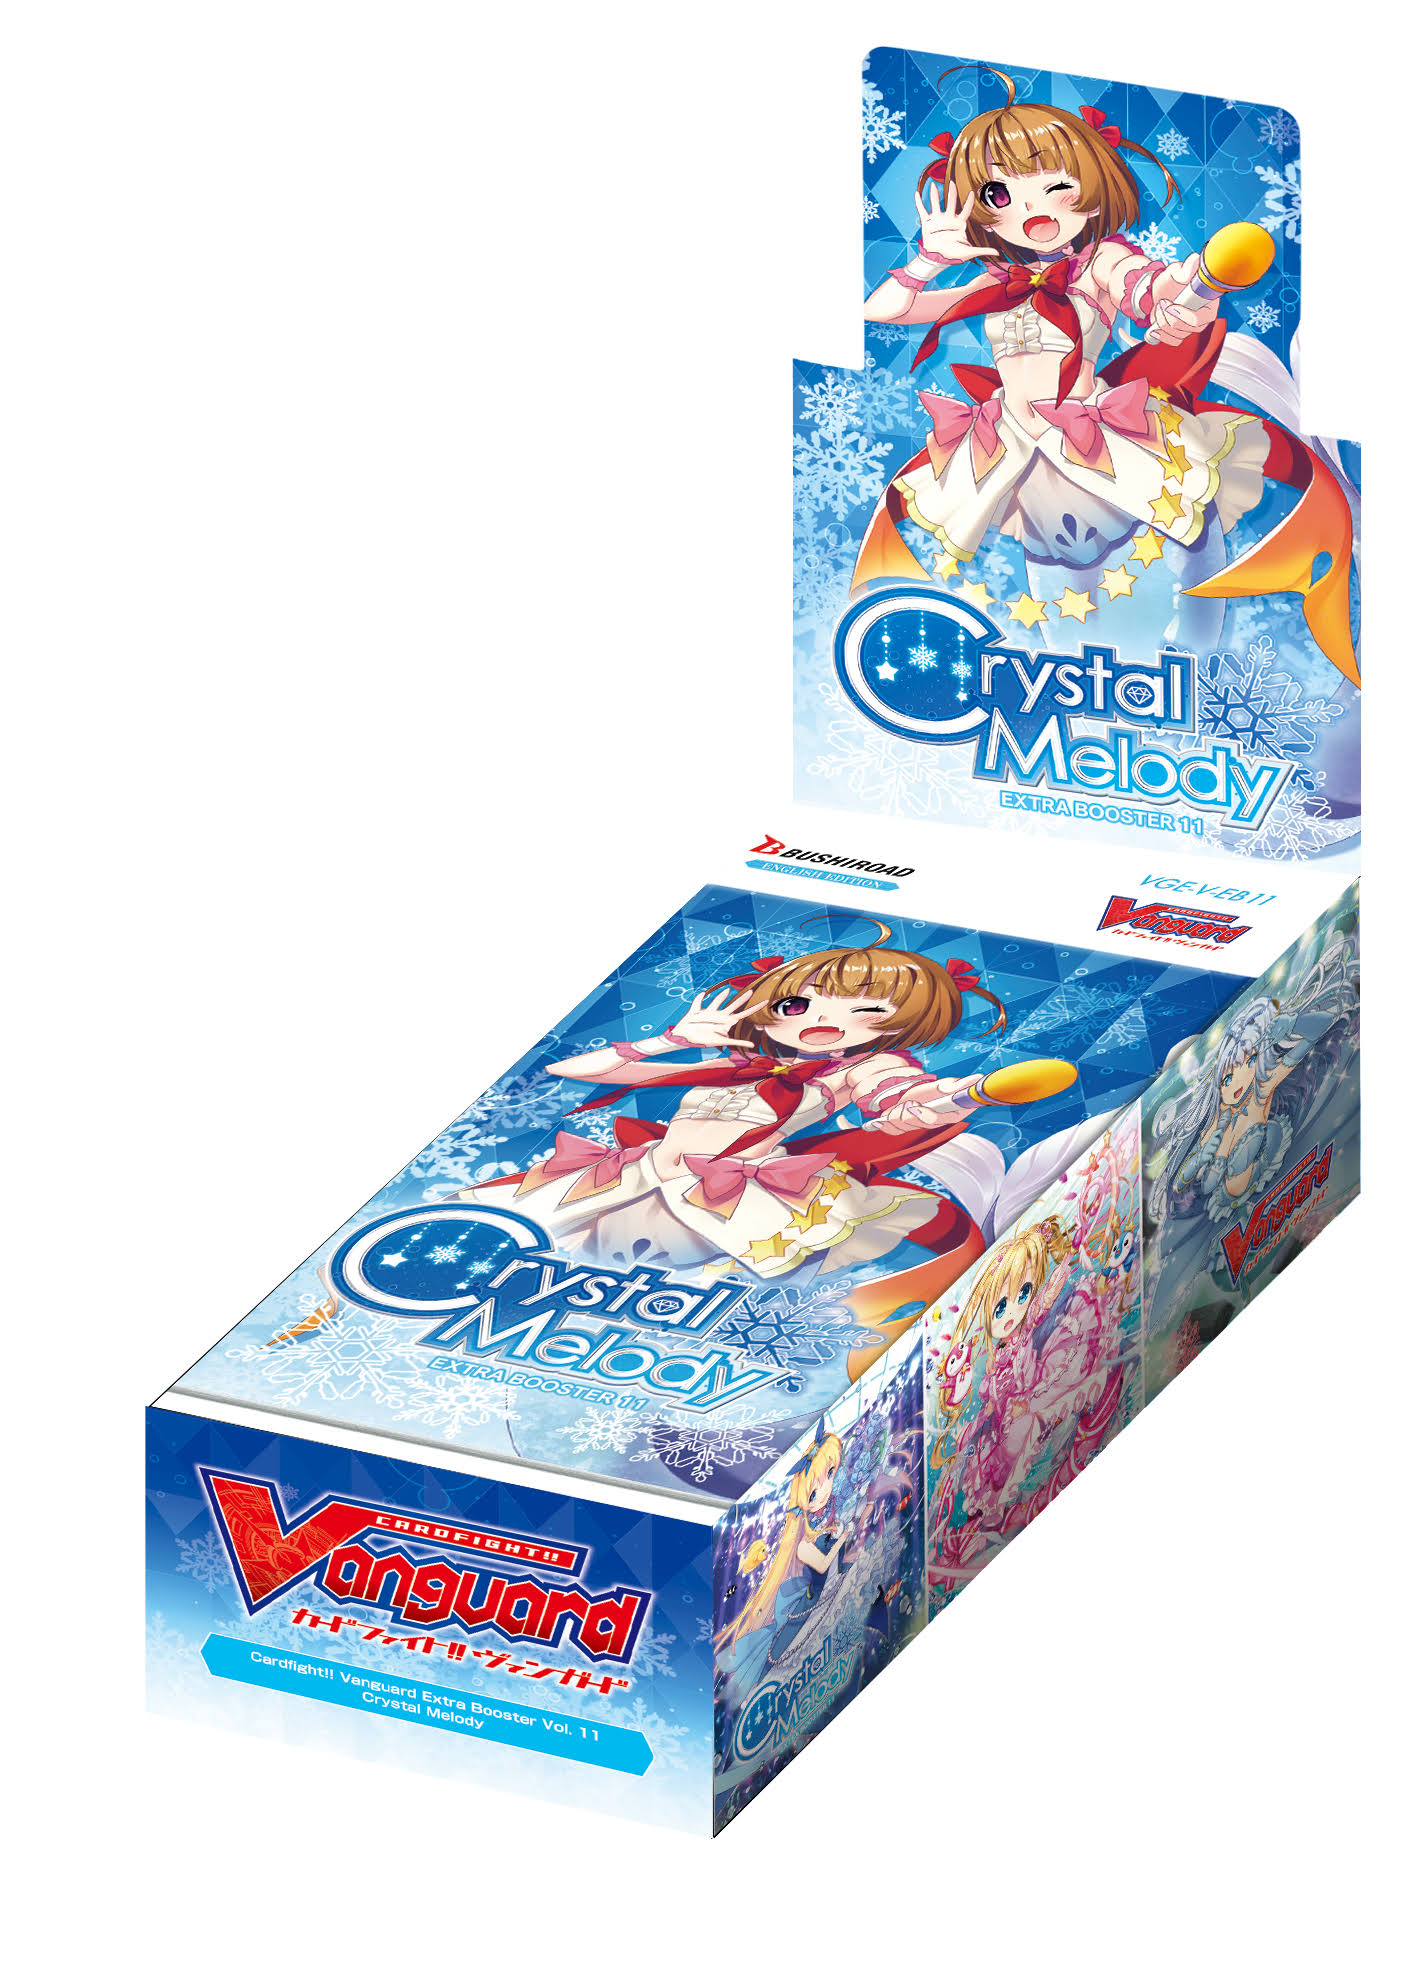 Cardfight!! Vanguard: Crystal Melody Extra Booster Box